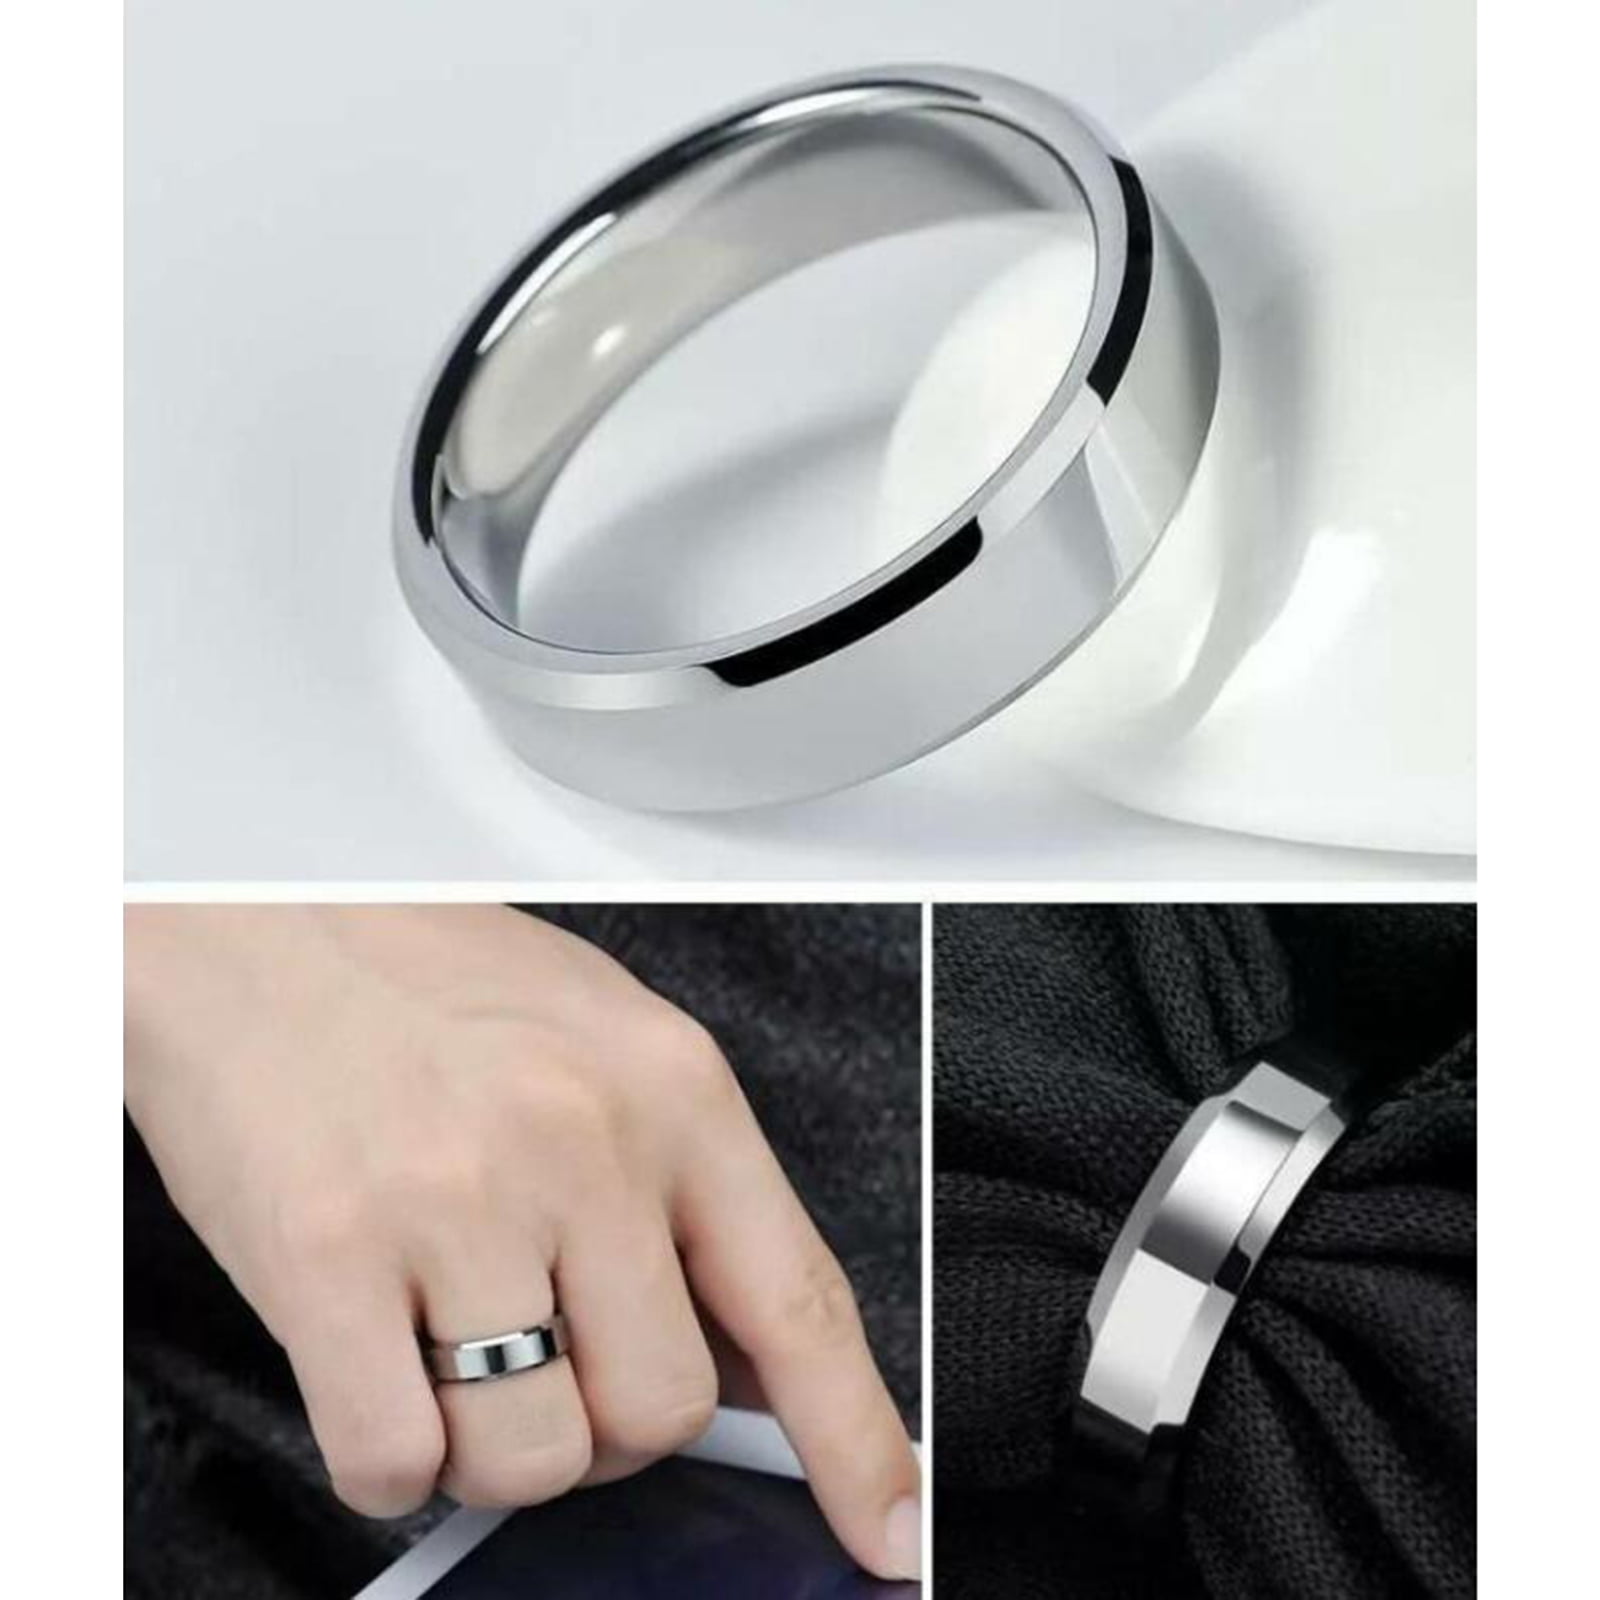 Details about   Magnetic PK Ring Magic Tricks Magic Close Up Gimmick Prop for Kids Adults